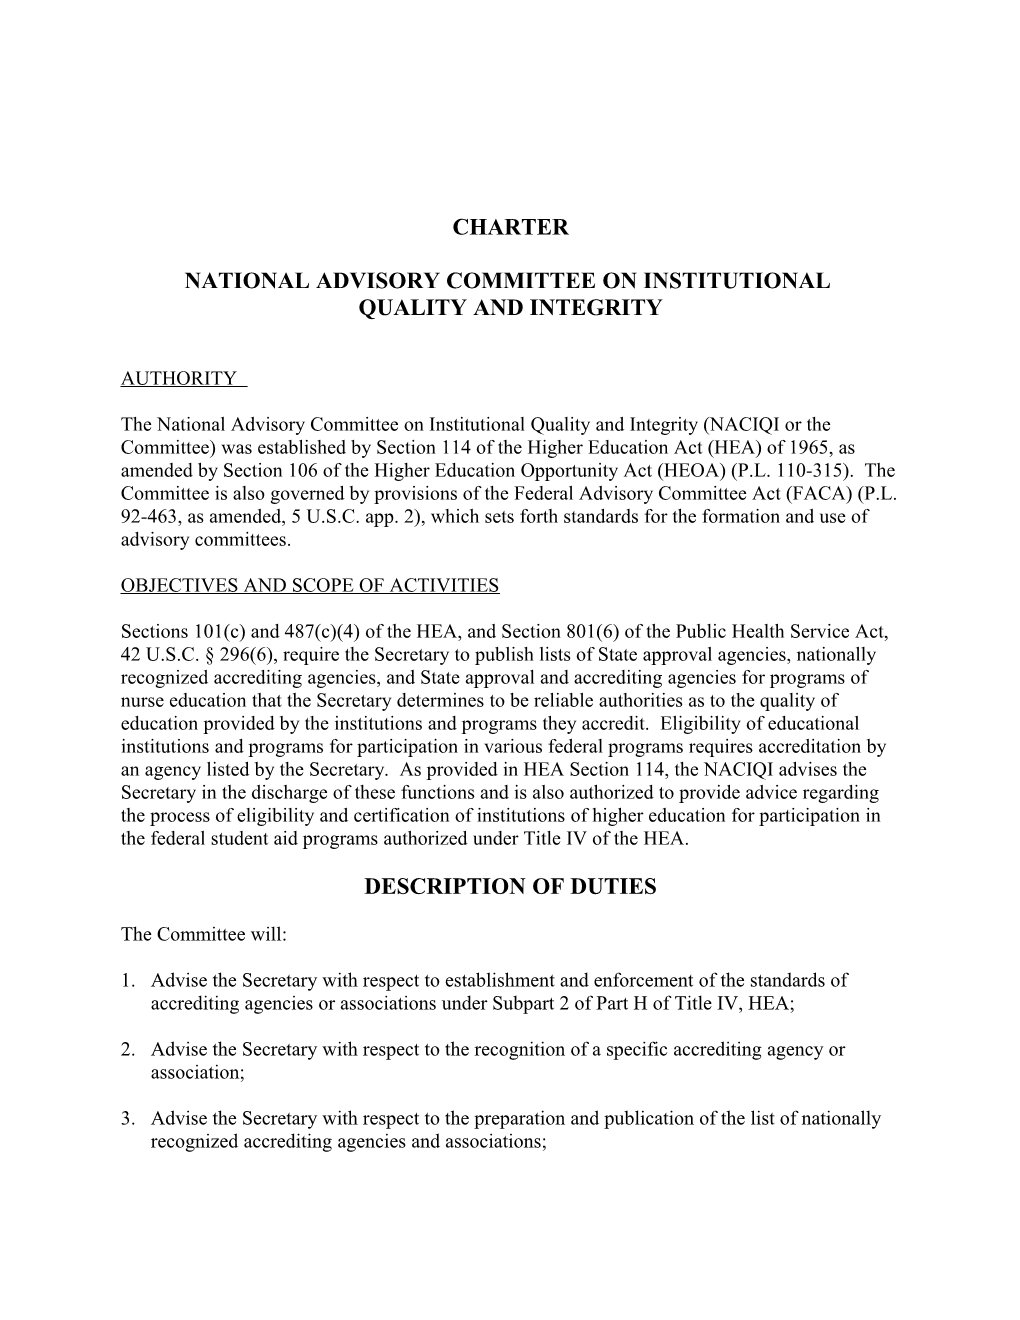 Charter 2015 Under National Advisory Committee on Institutional Quality and Integrity (MS Word)